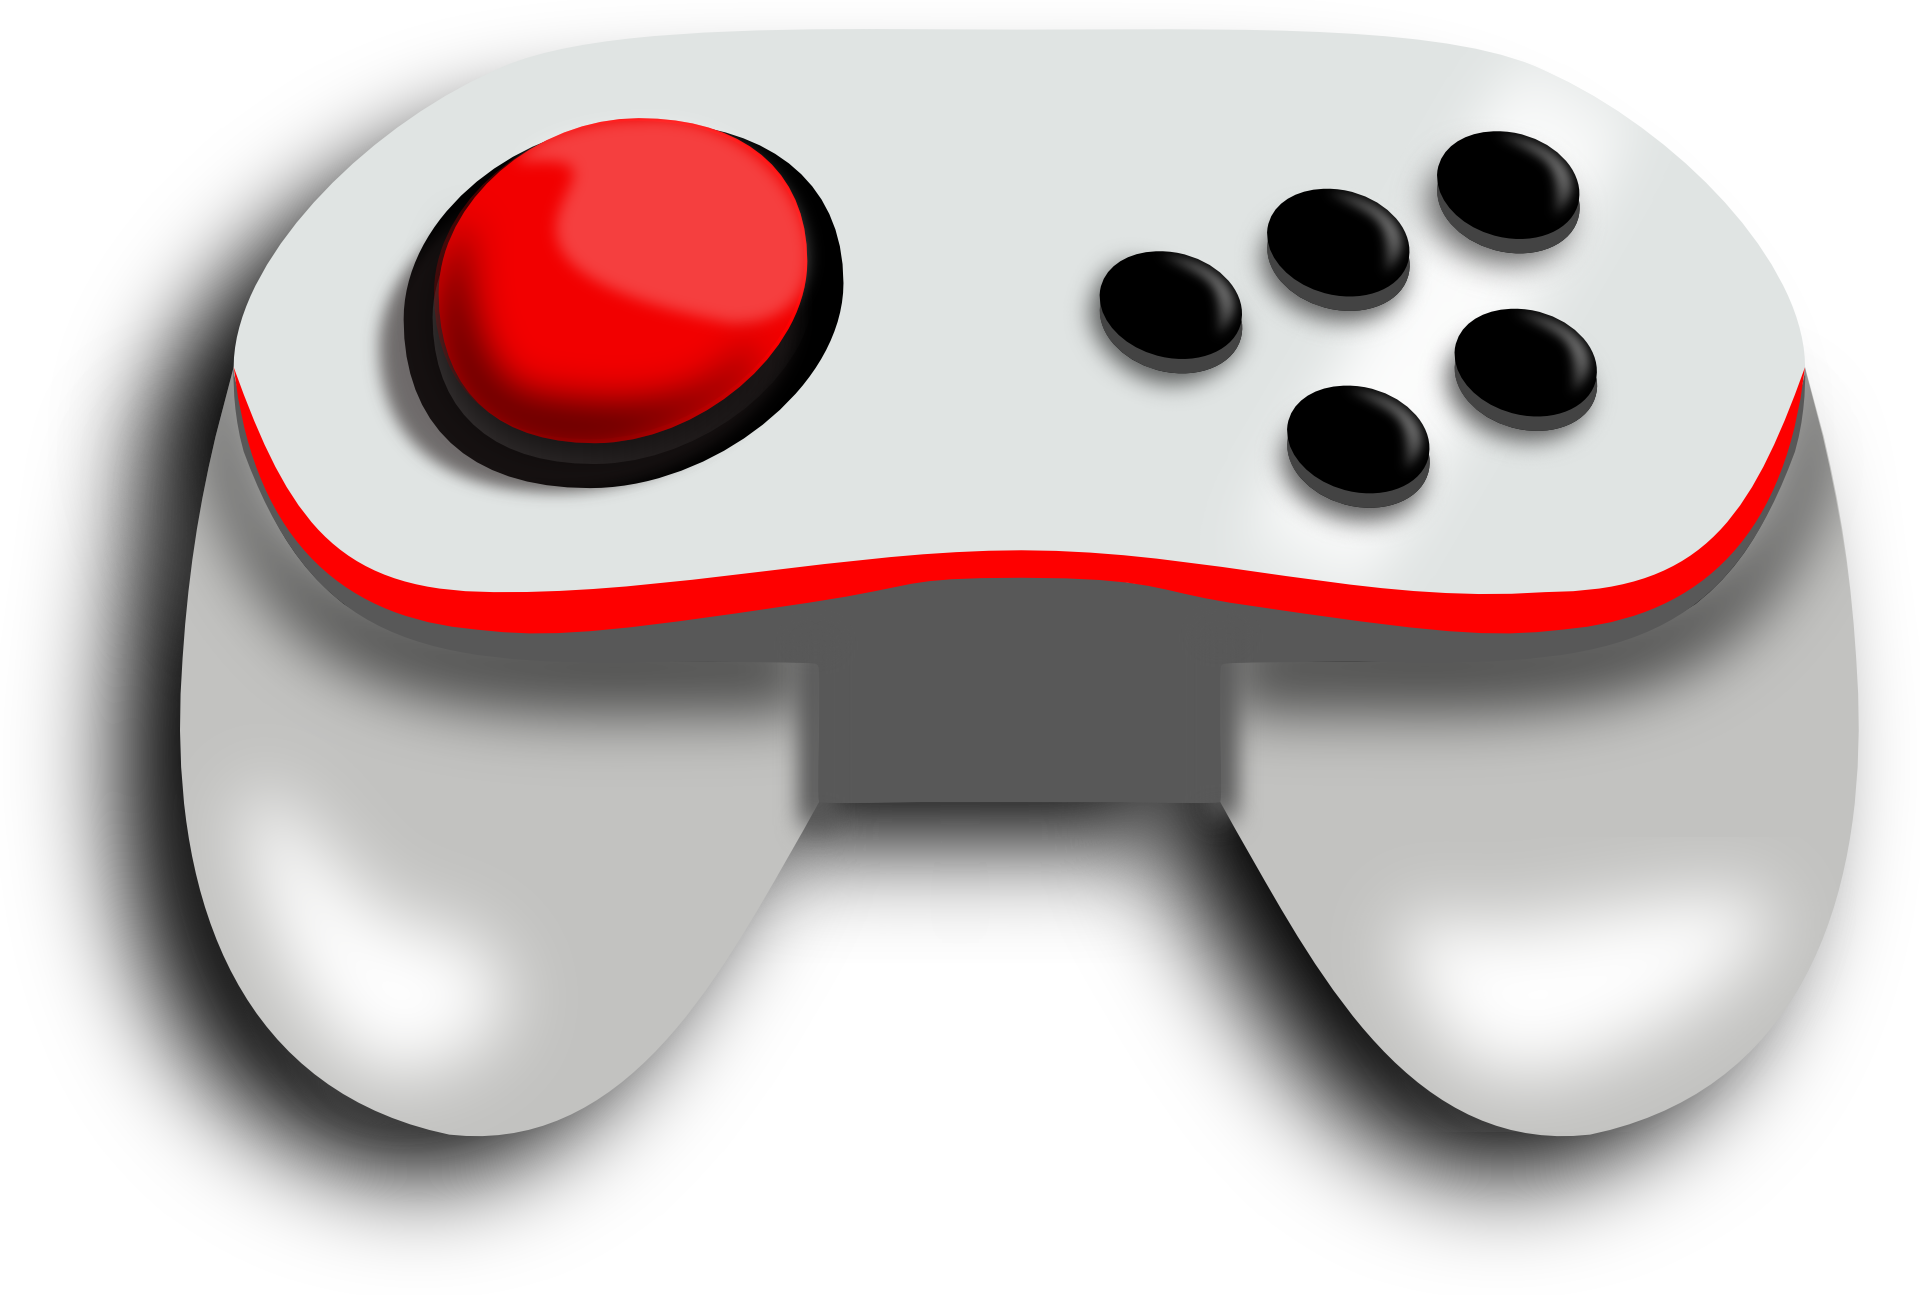 Video game controller drawing free image download